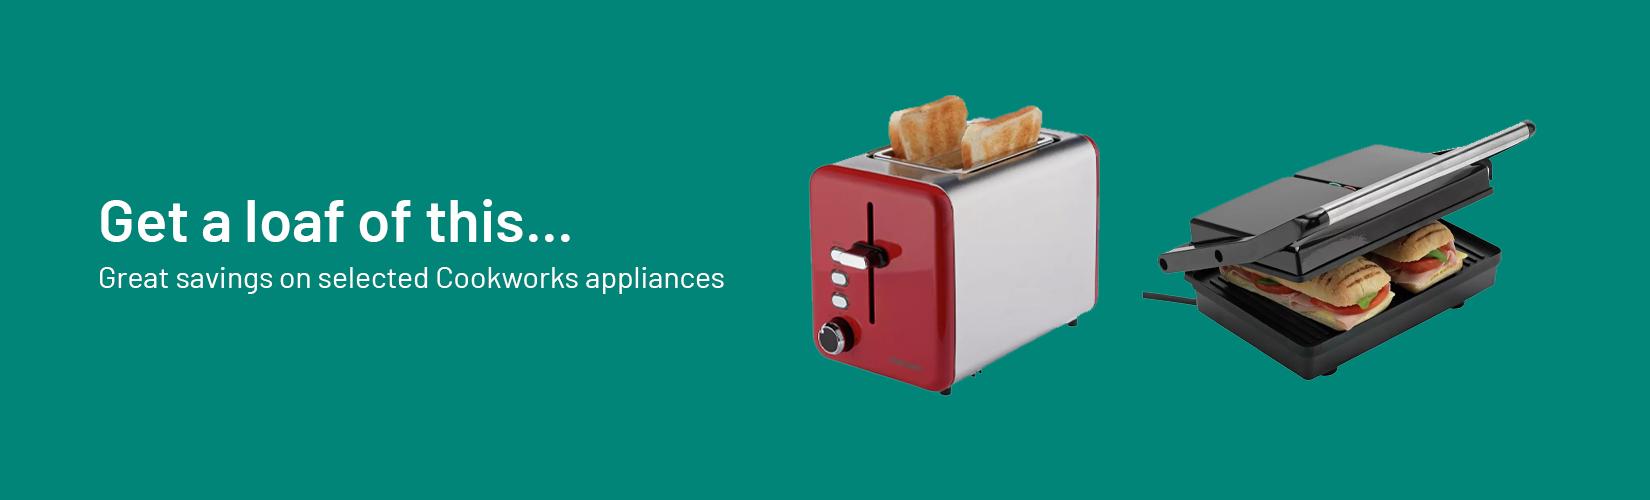 Get a loaf of this. Great savings on selected Cookworks appliances.